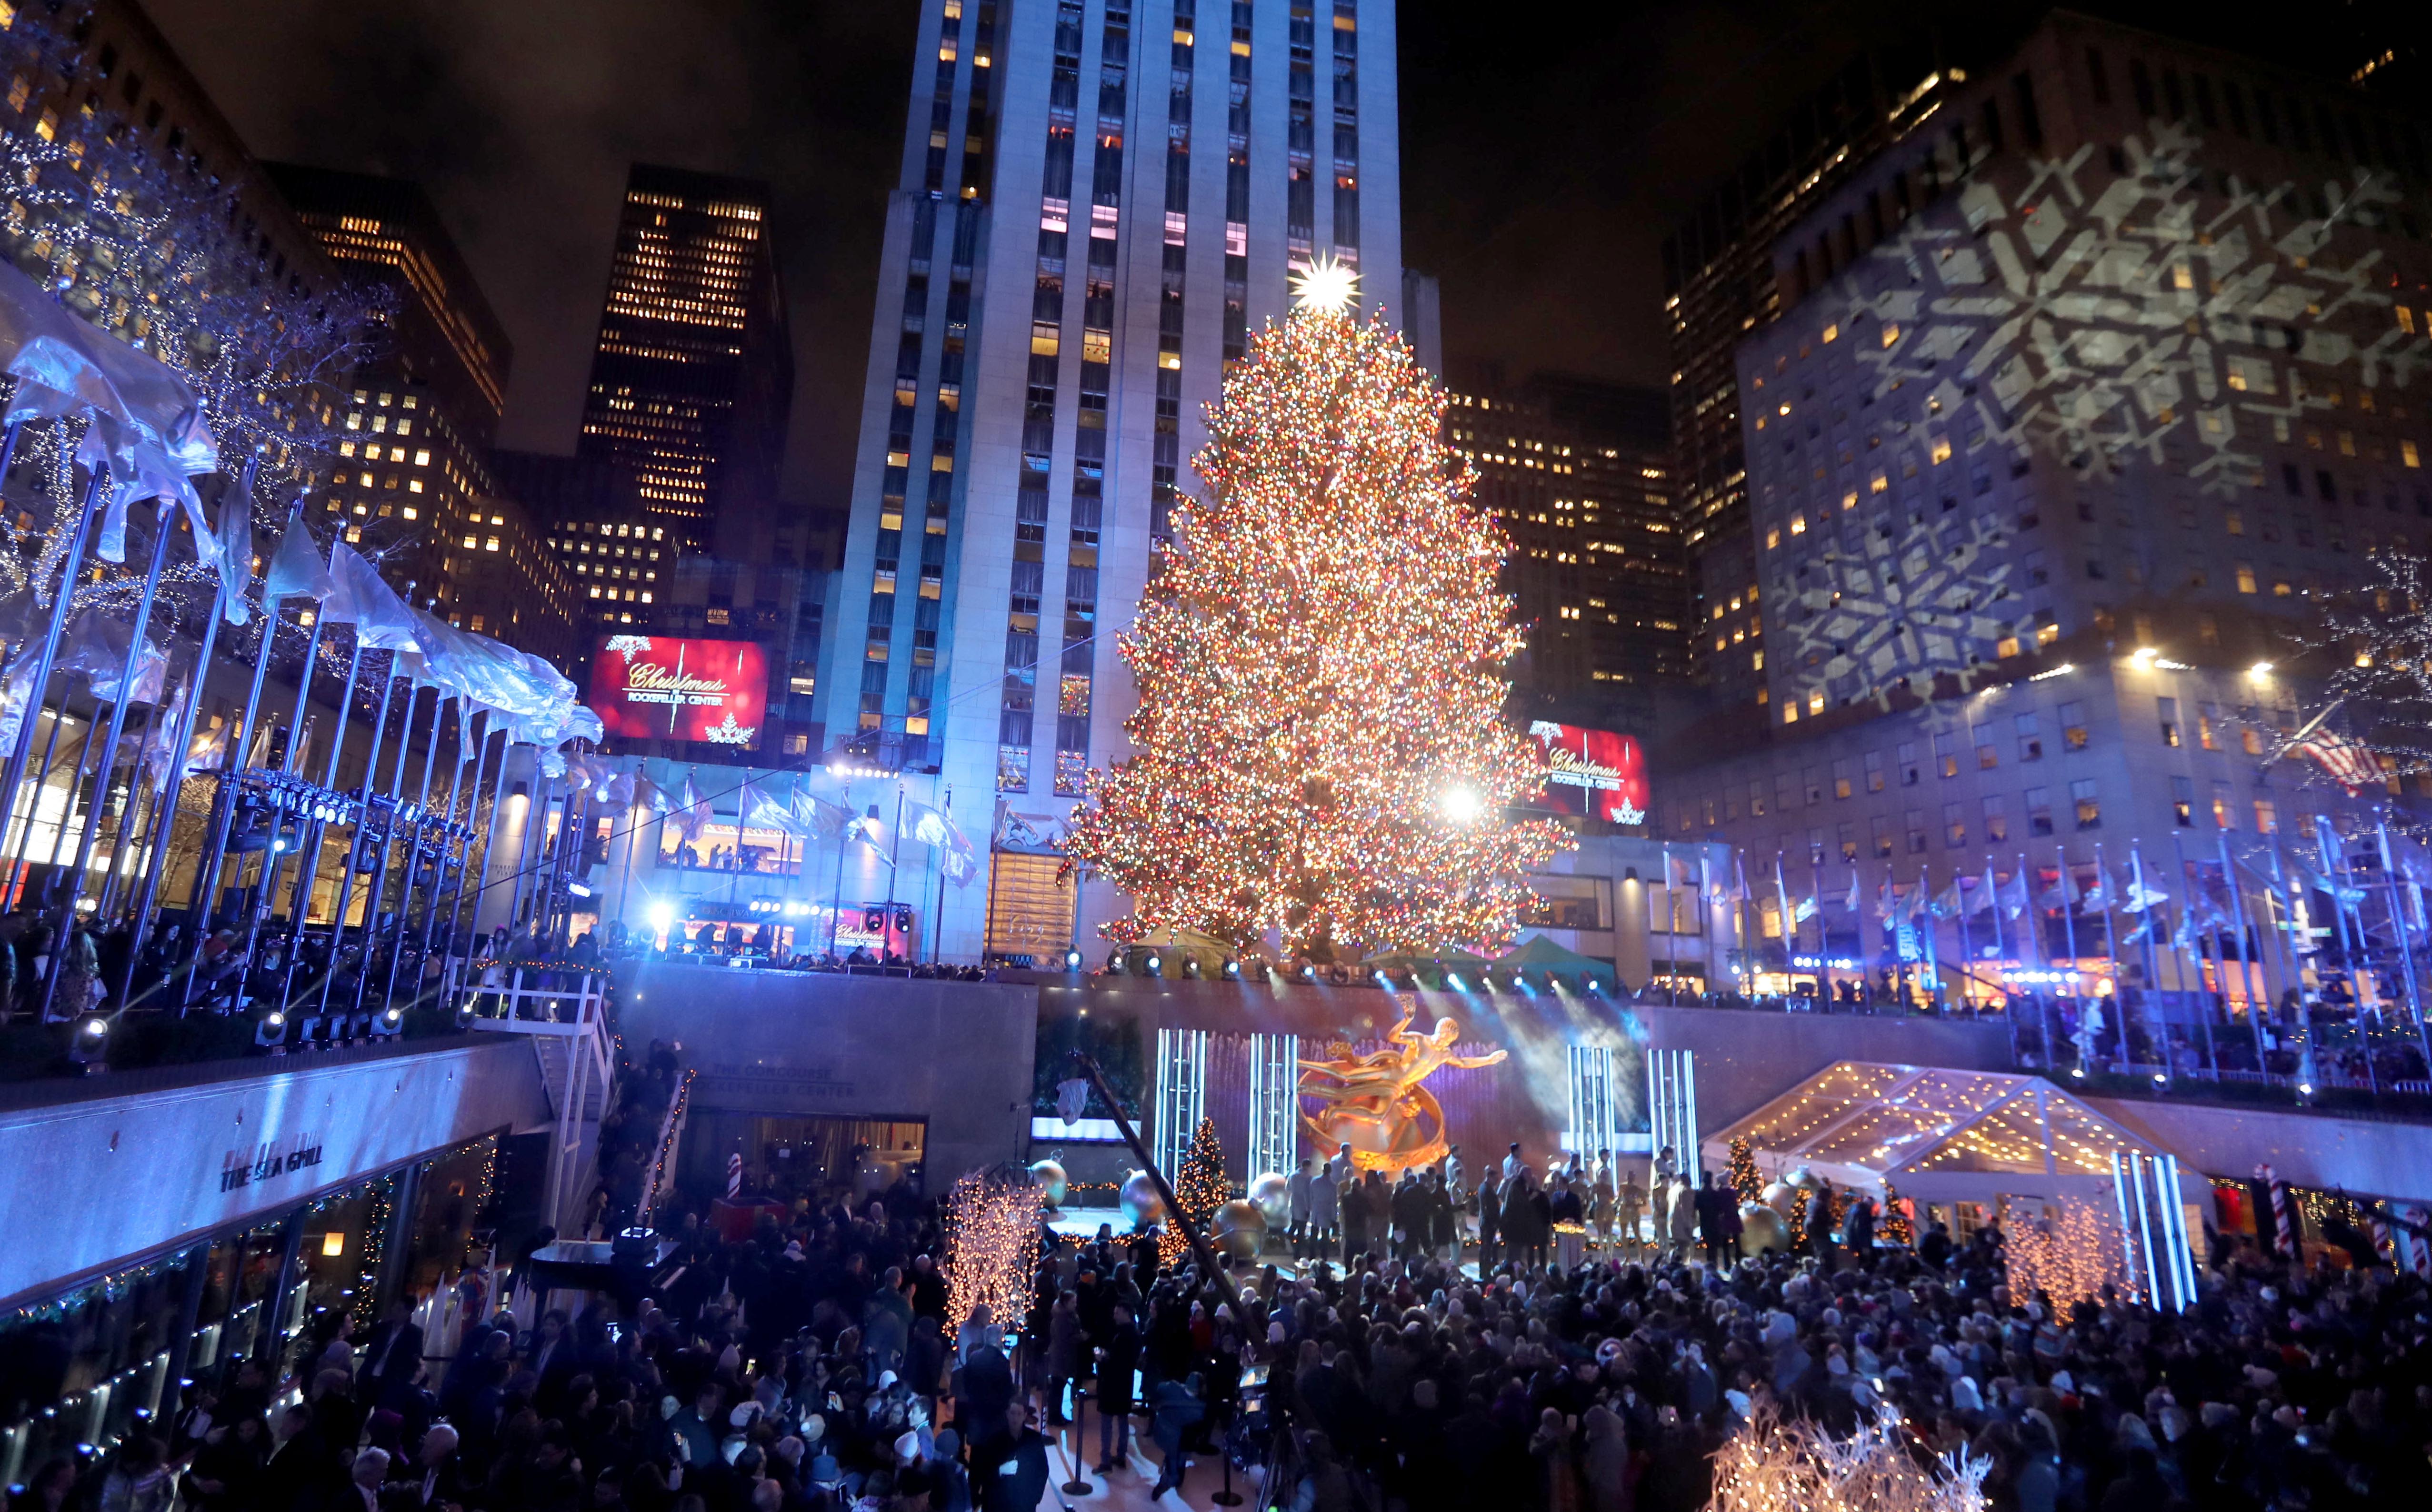 Rockefeller Center Christmas tree 2021: Where's it from, when will it be lit? thumbnail